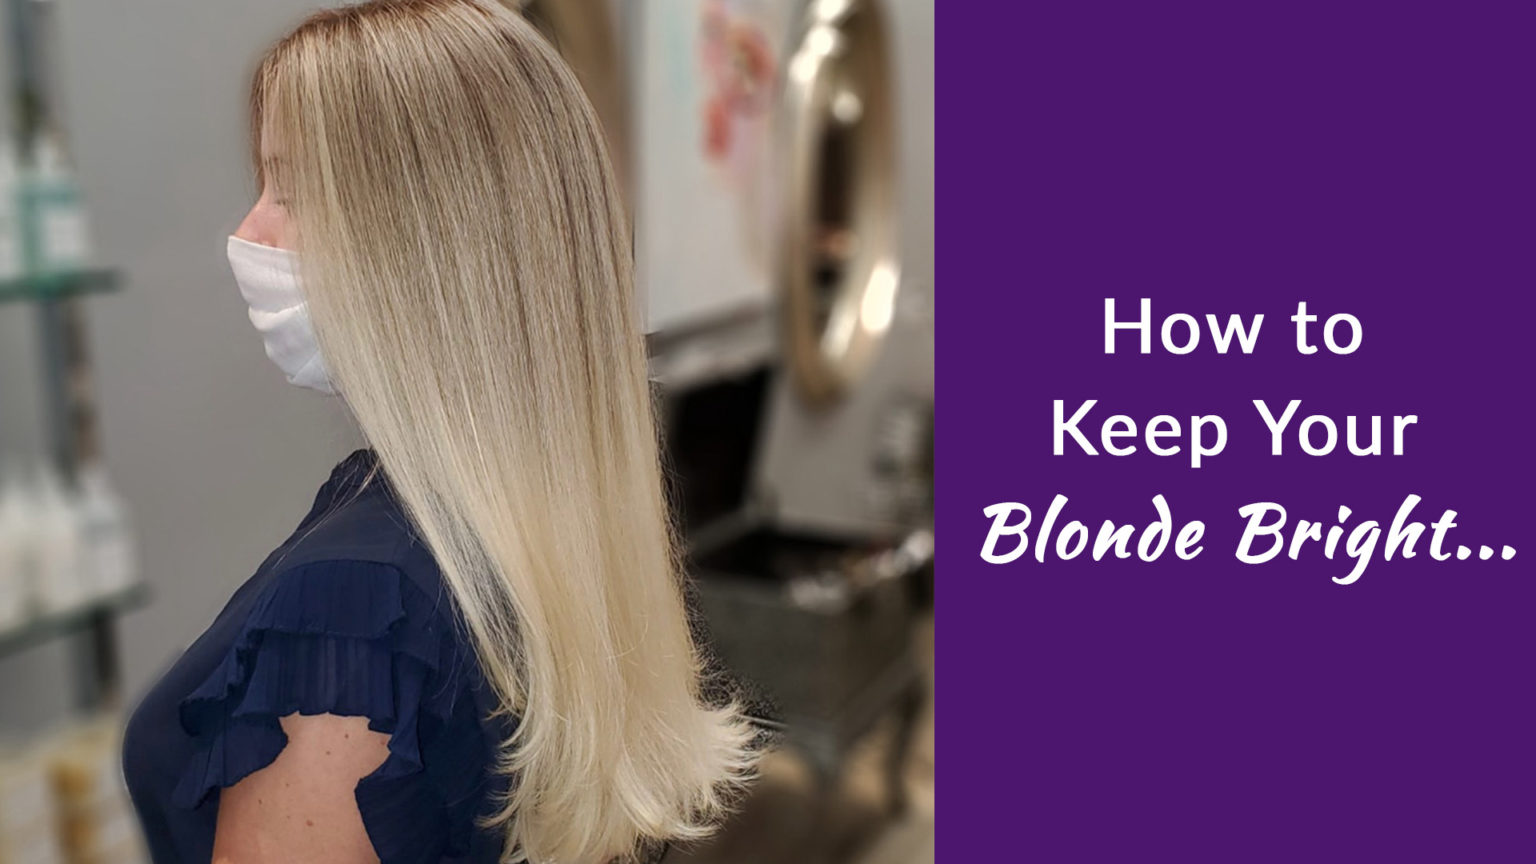 3. Tips for Lightening Blonde Hair at Home - wide 9